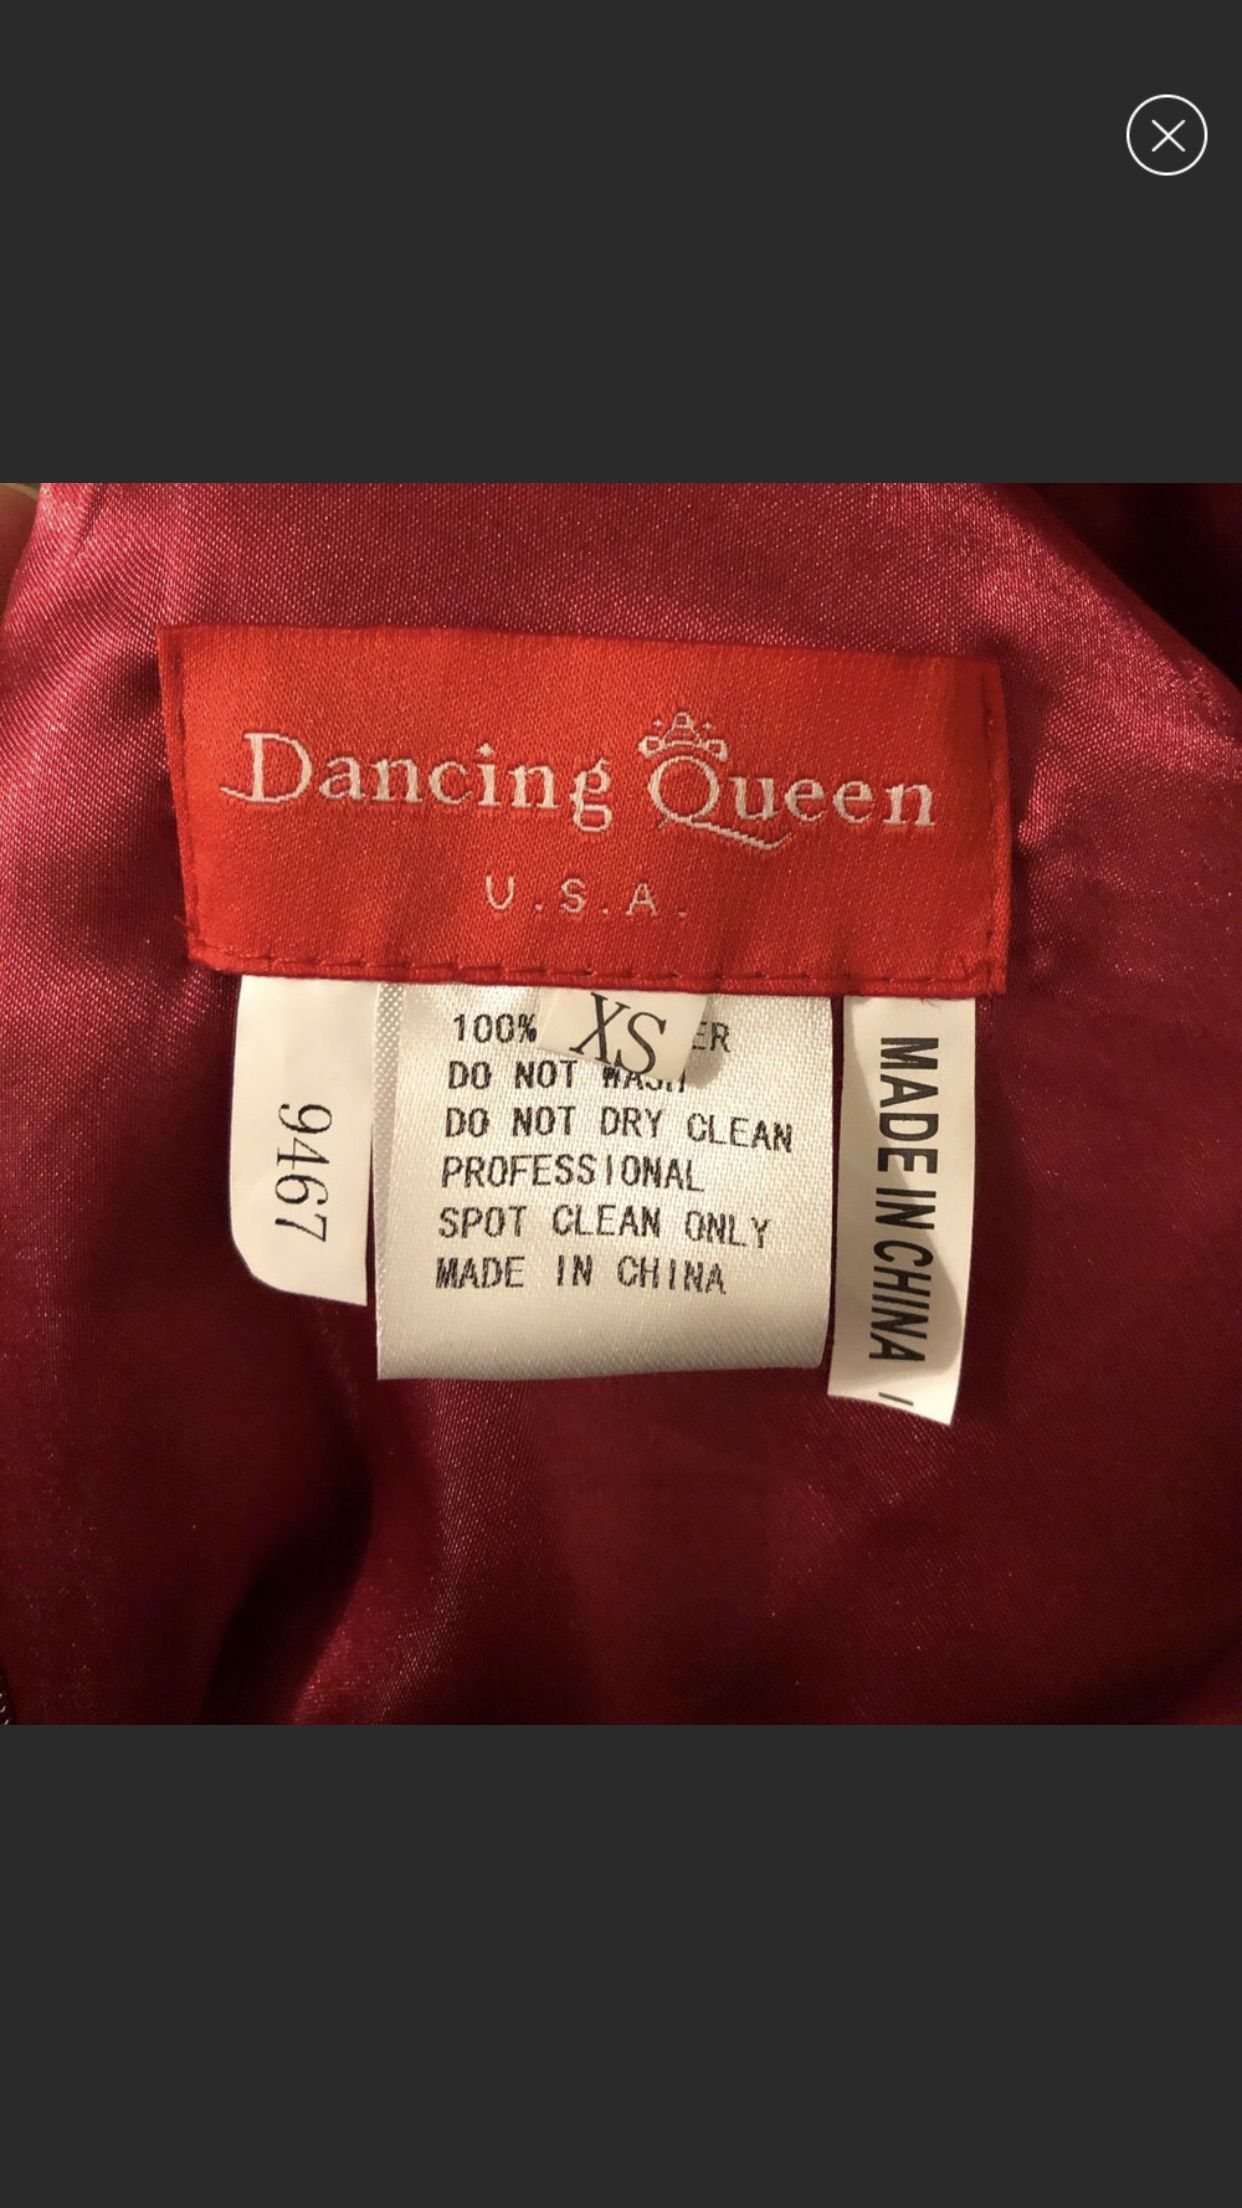 Size 0 Prom Halter Red Cocktail Dress on Queenly